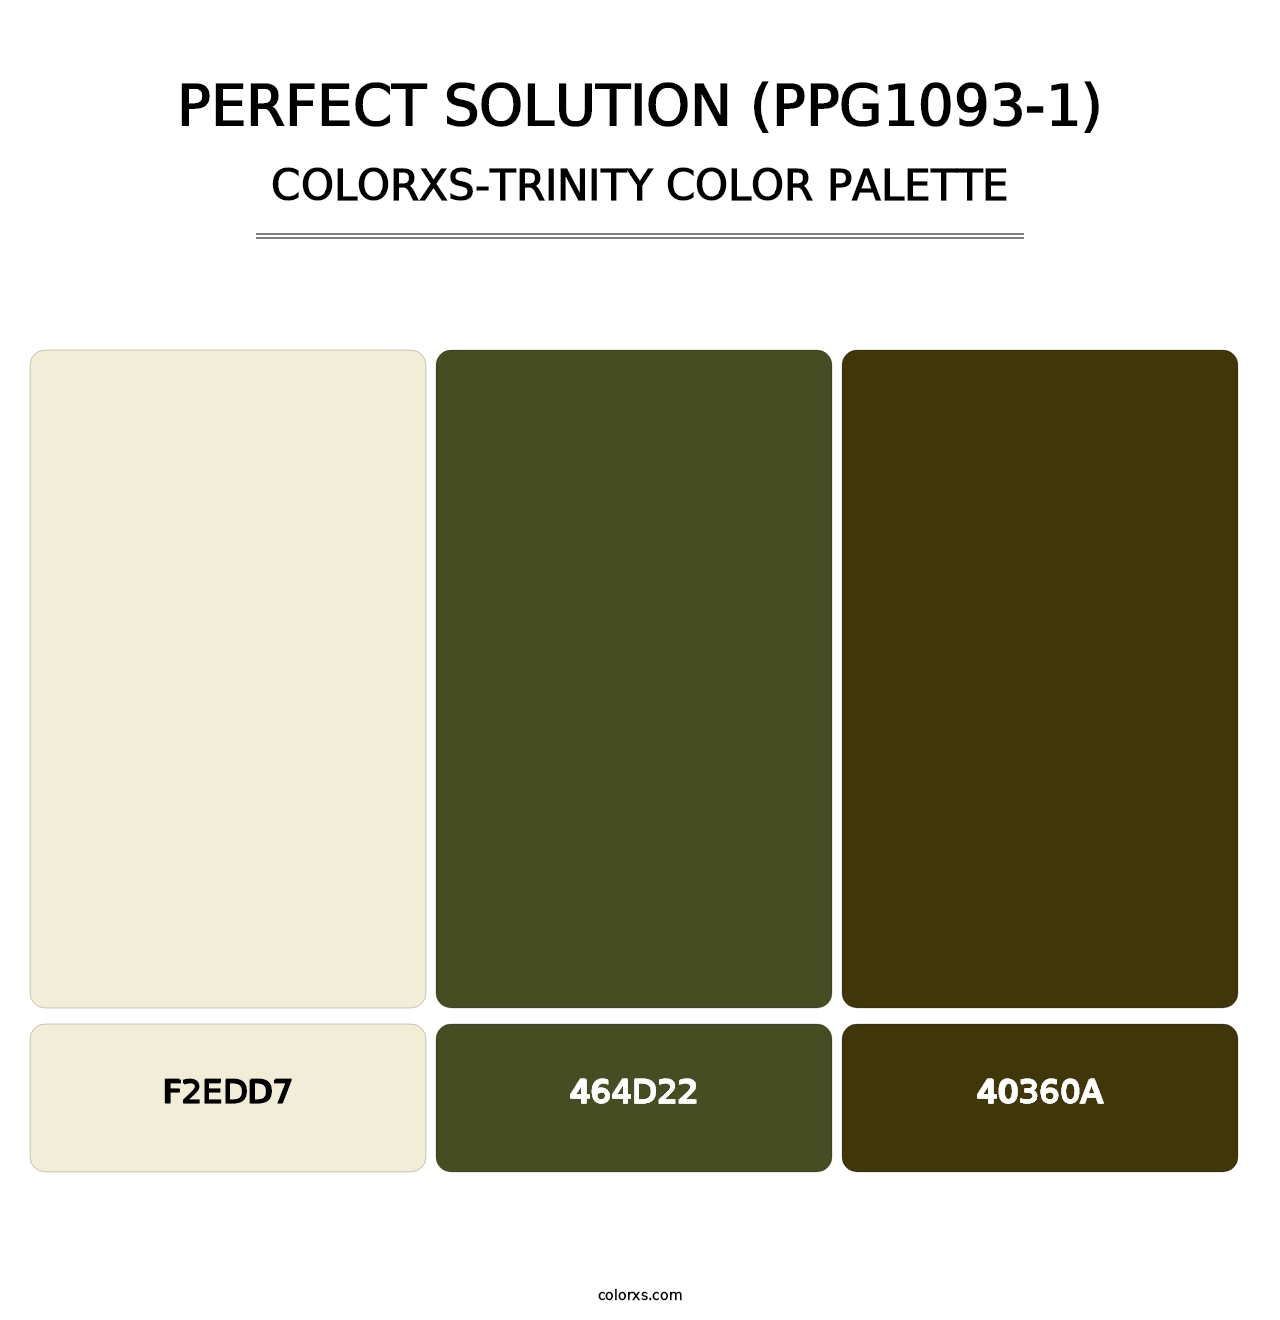 Perfect Solution (PPG1093-1) - Colorxs Trinity Palette